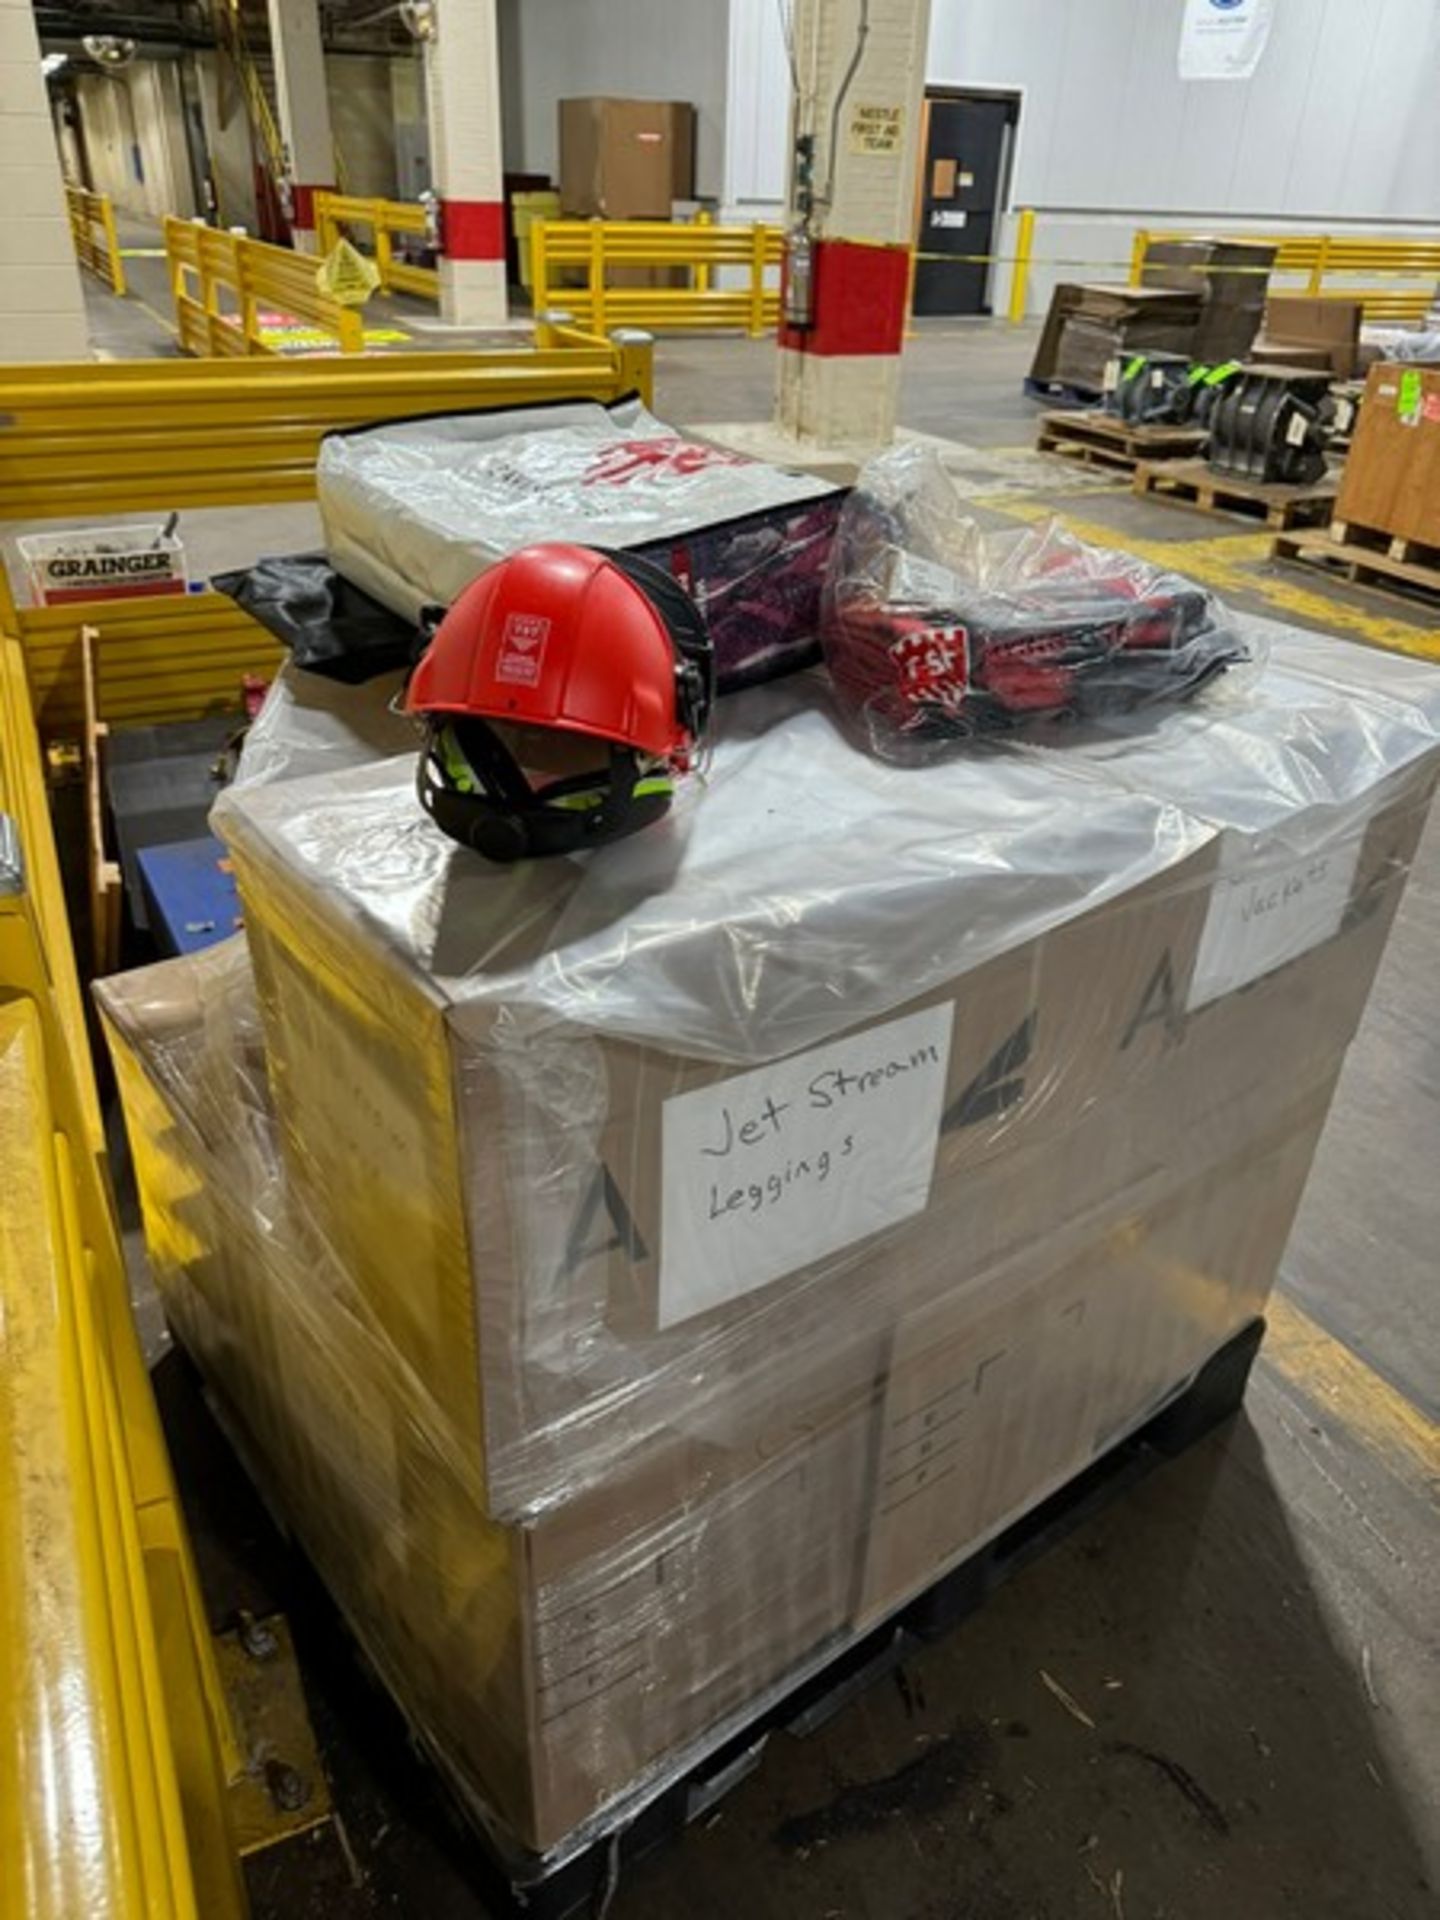 NEW Jet Stream Equipment, Includes NEW Jackets, Helmets, Pants, Leggins (LOCATED IN FREEHOLD, N.J.) - Image 8 of 9